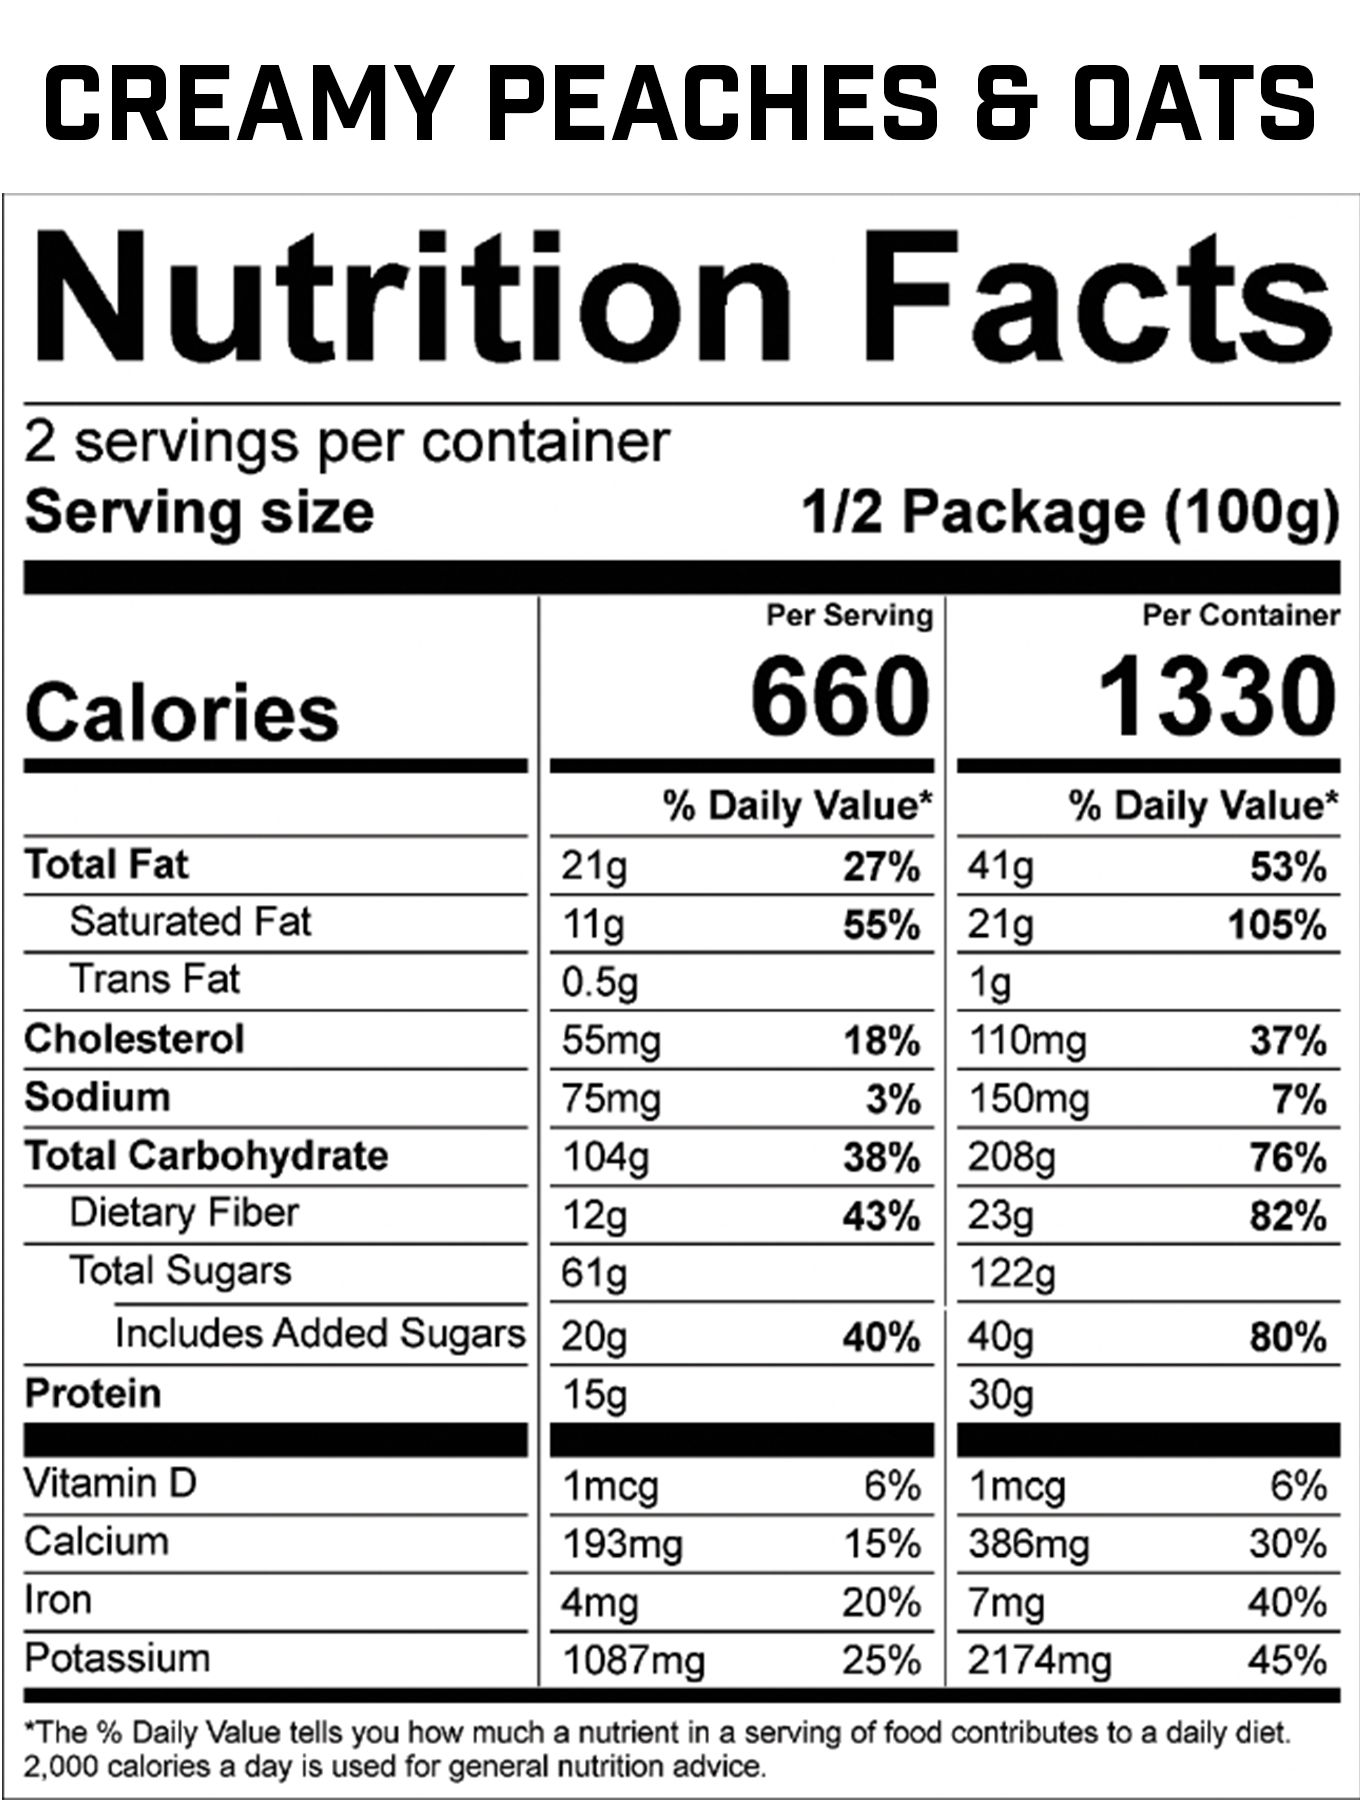 A nutrition facts label with black text, providing essential information about the undefined product.